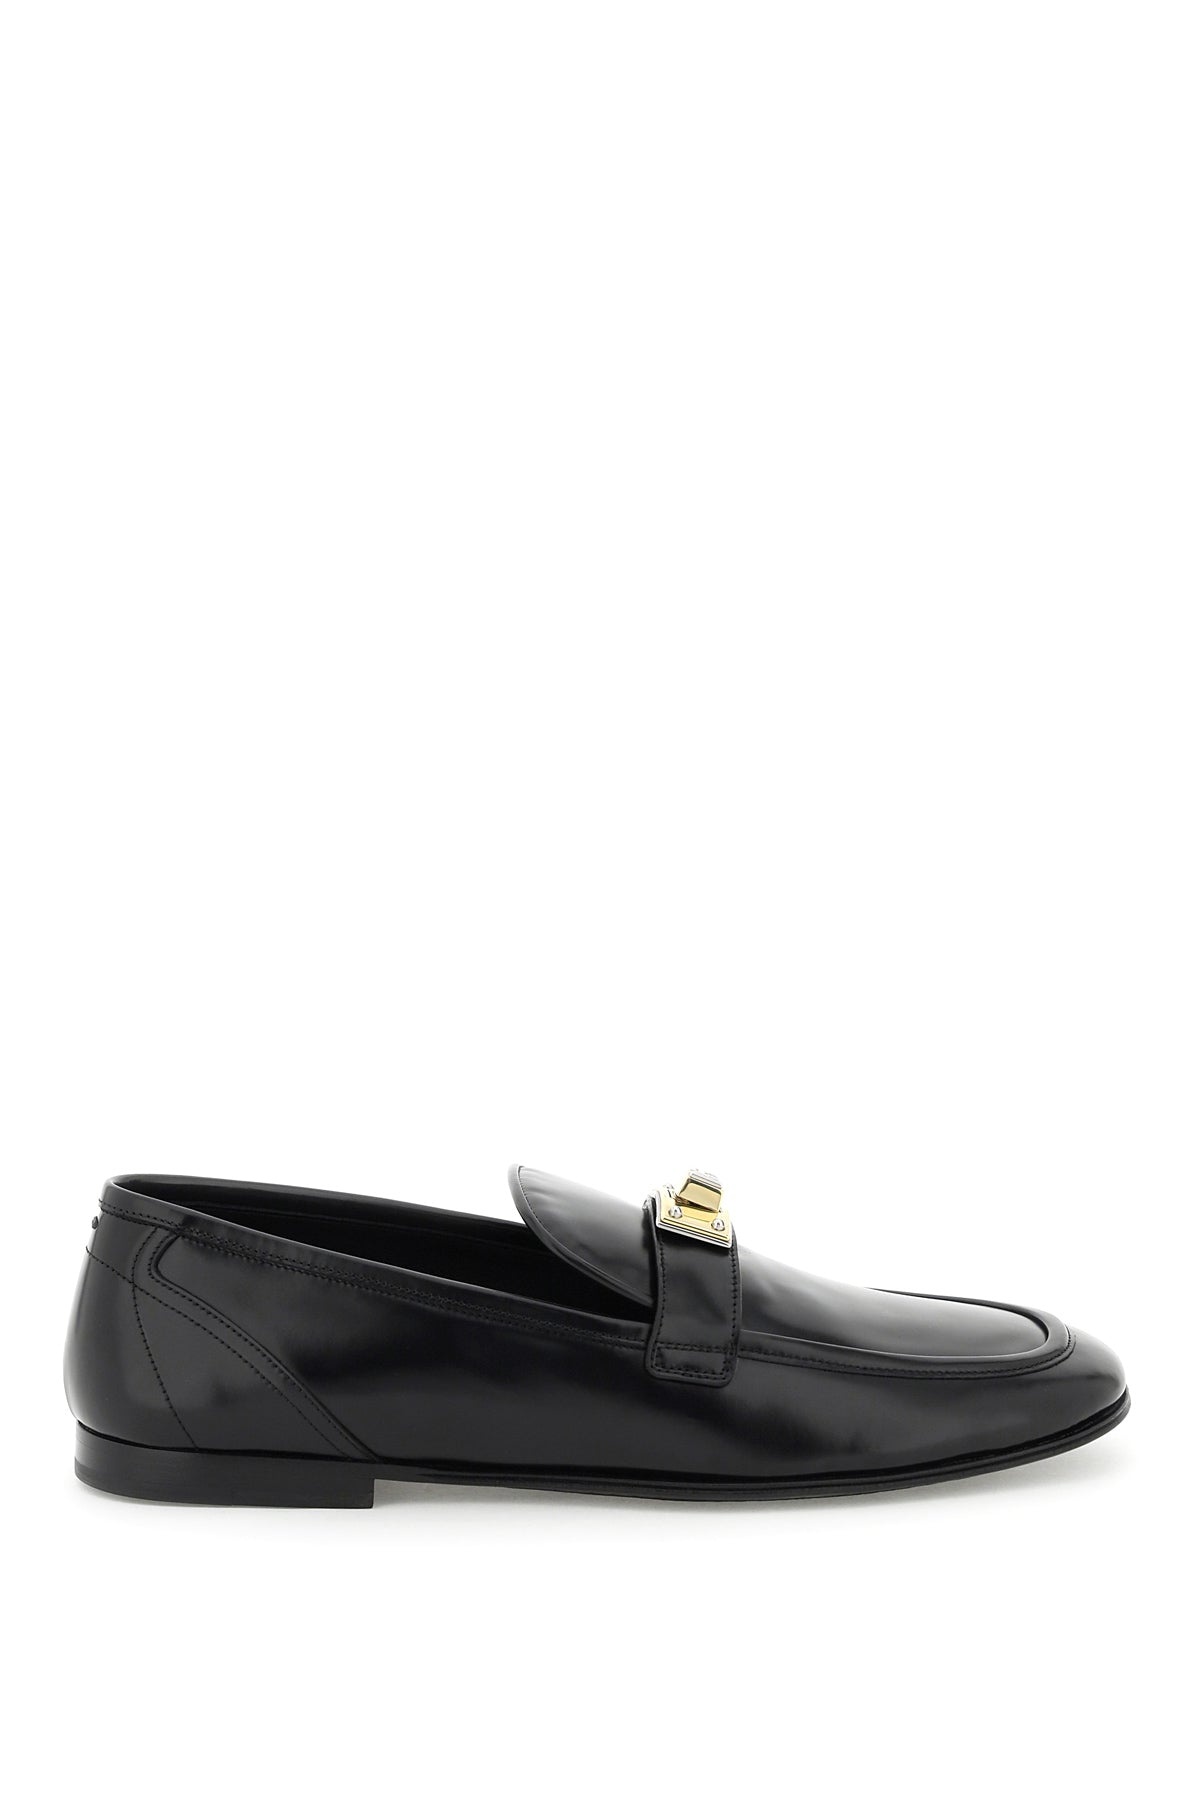 Dolce & Gabbana Leather Loafers Men - 1